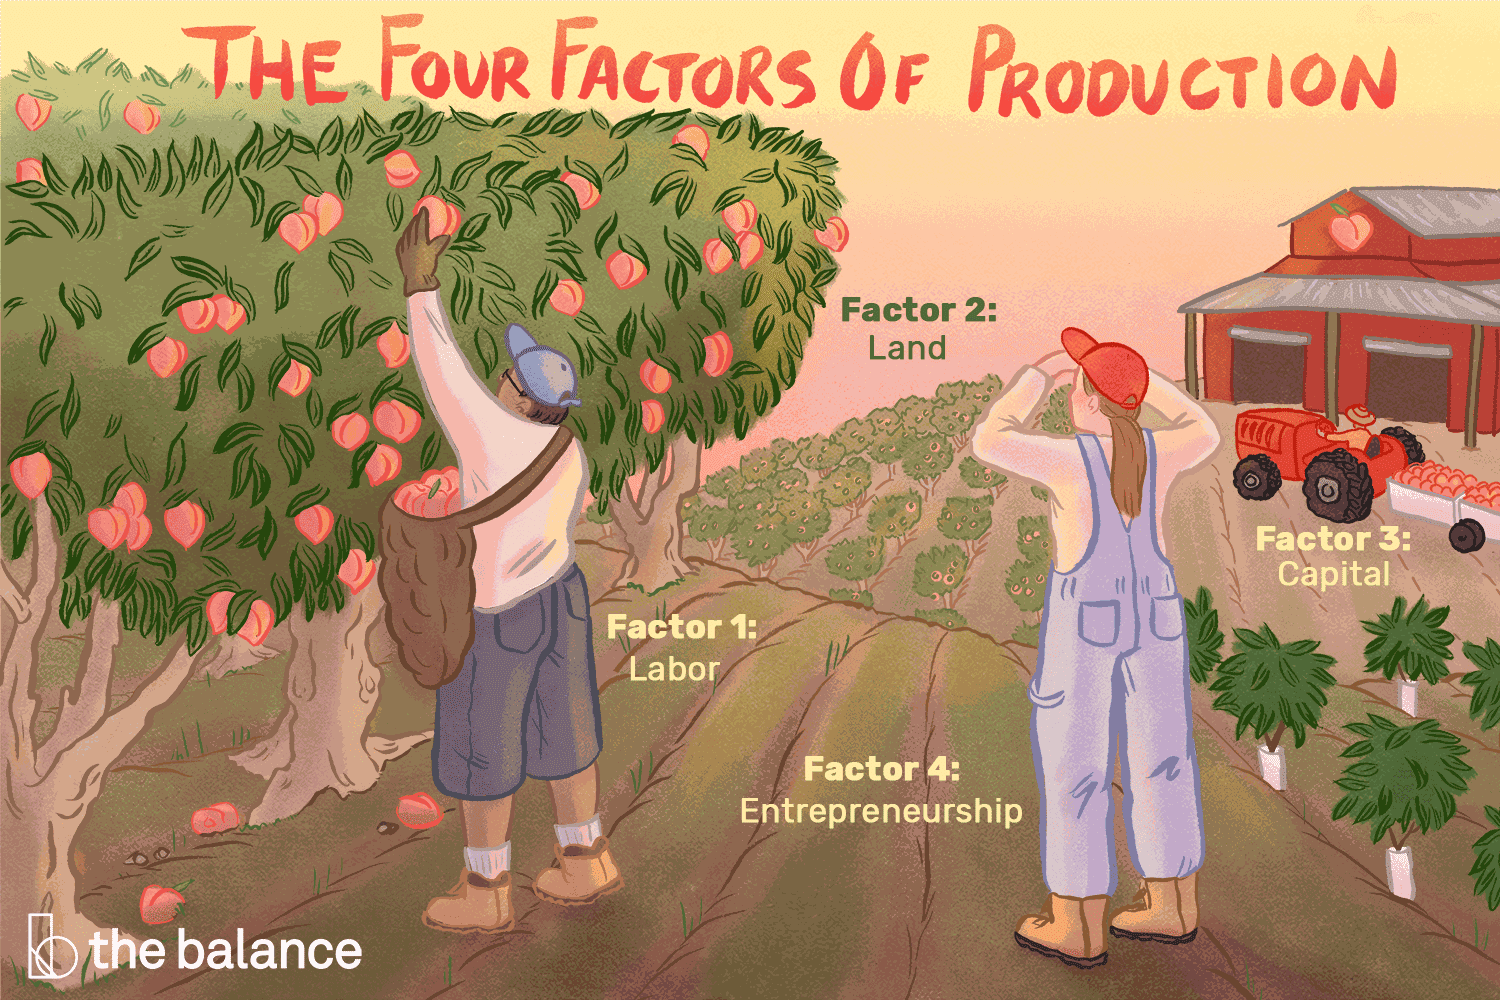 The factors of production